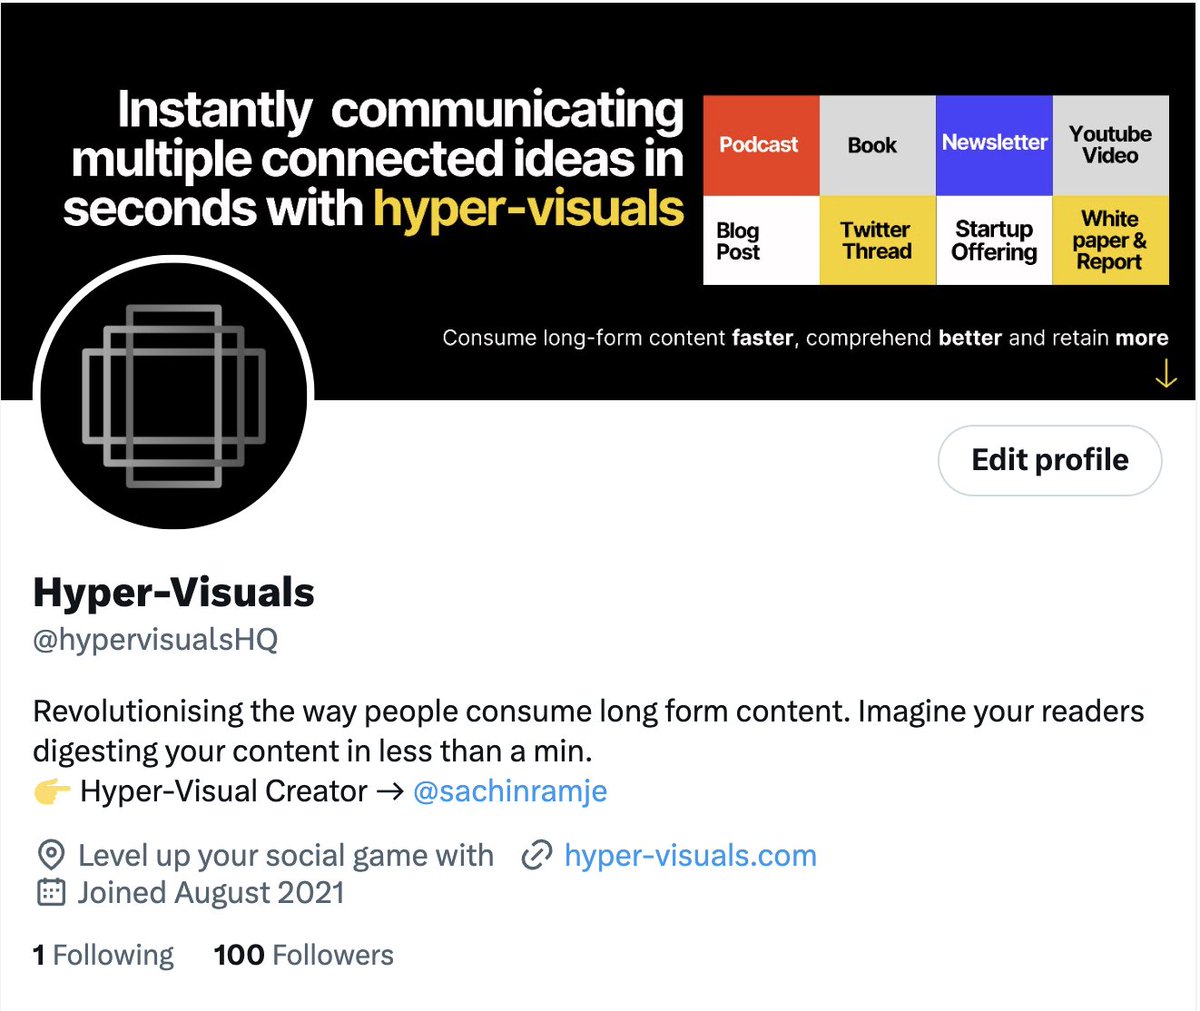 Hit 100 on @hypervisualsHQ! Let's watch this community explode in 2024. Here's to building a hyper-visual future, one follower at a time.